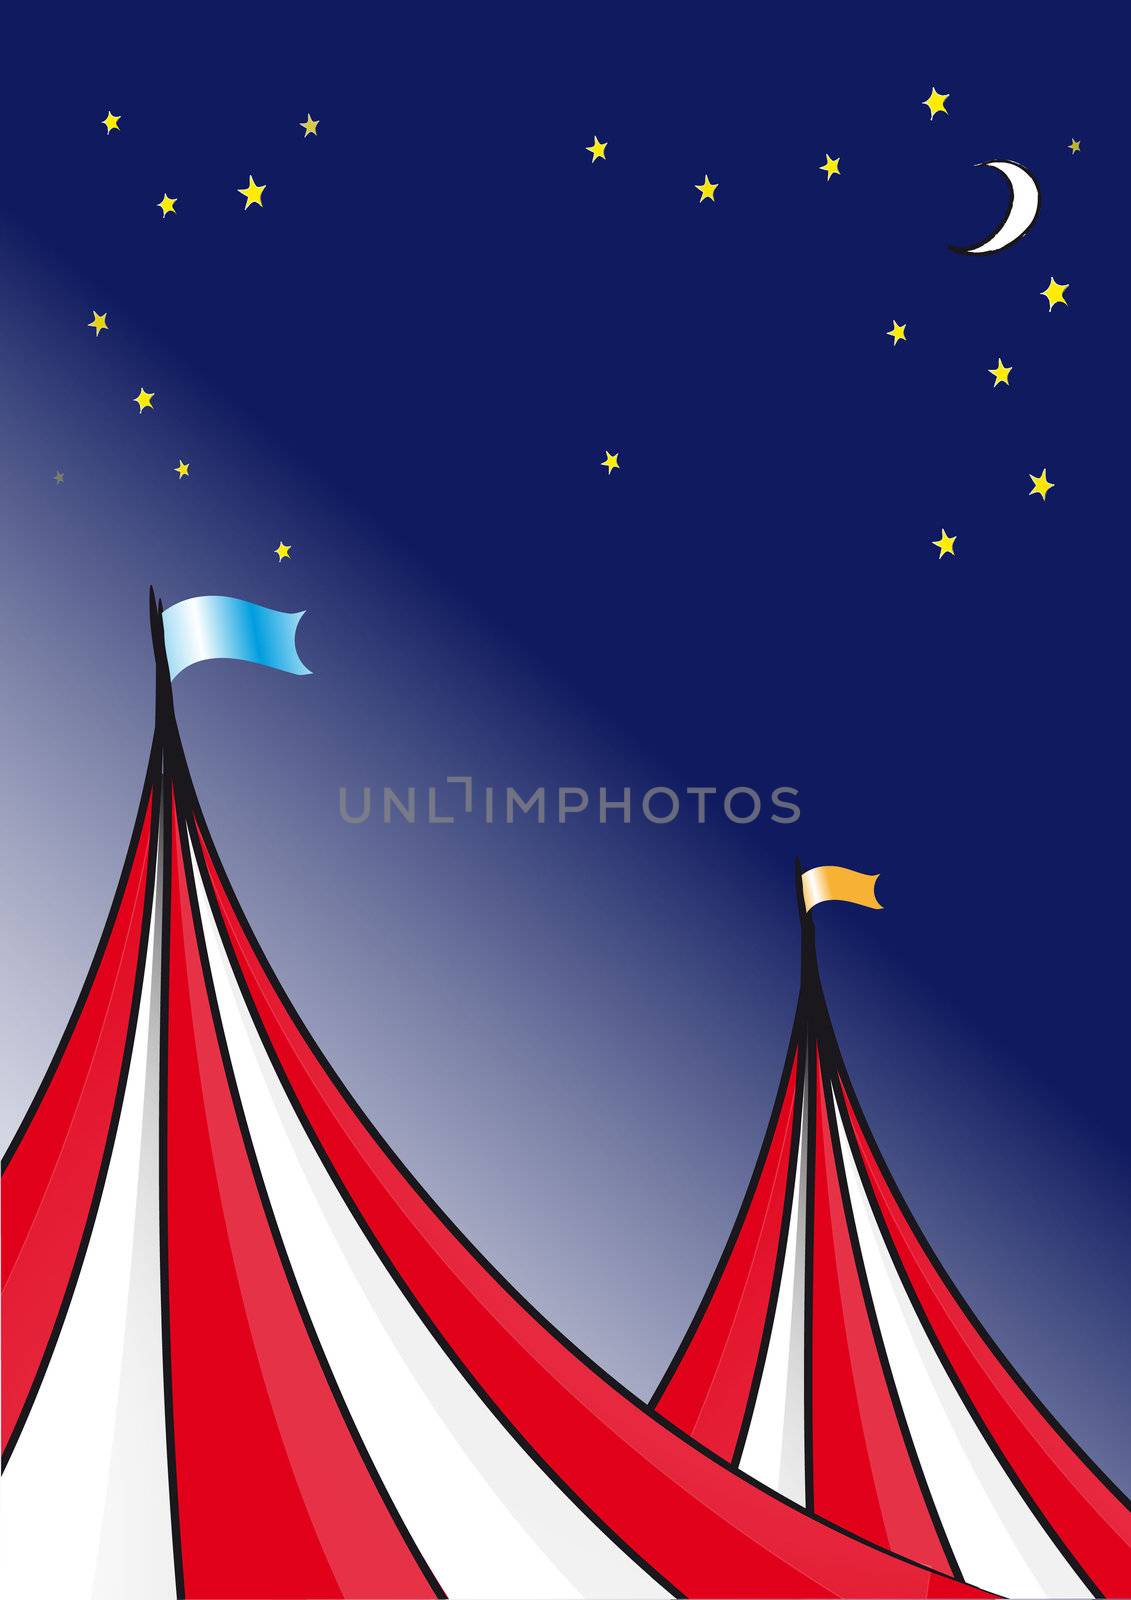 Circus tent background and a night sky with stars and moon.